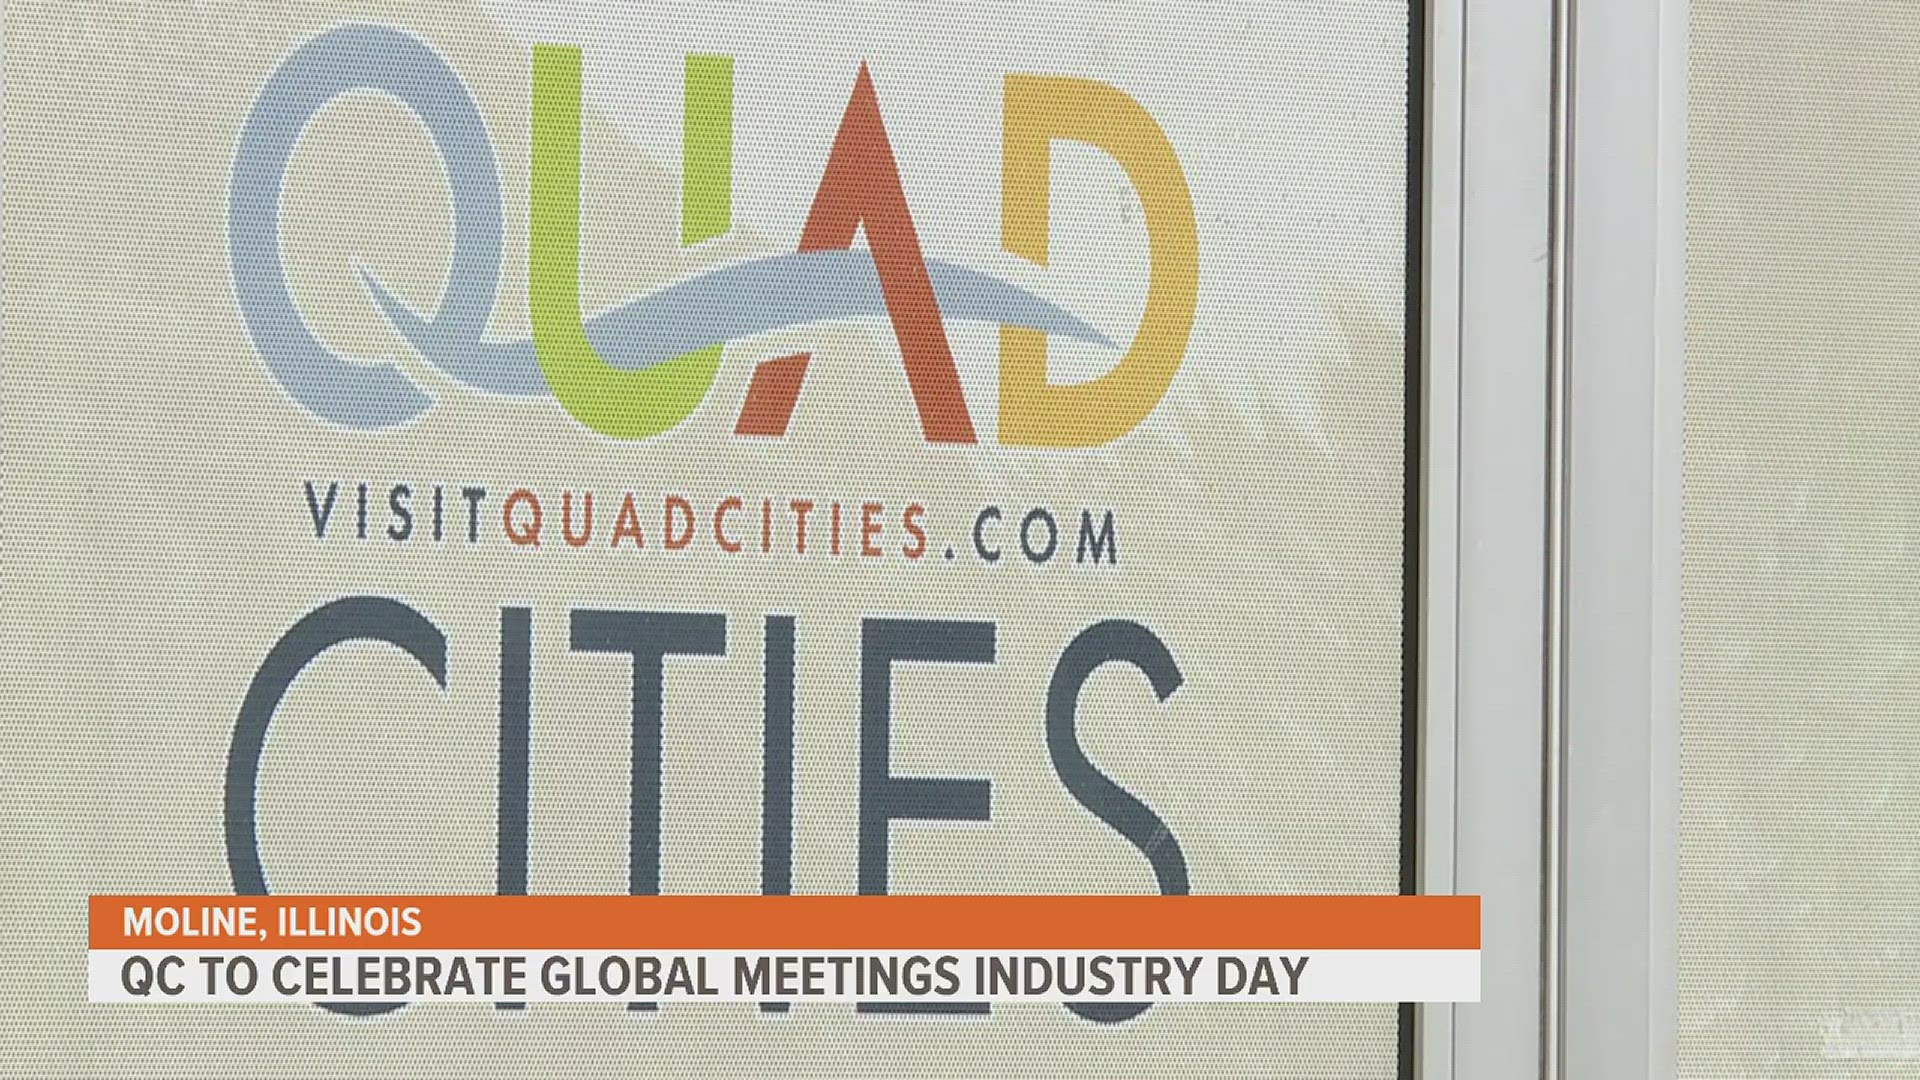 Global Meetings Industry Day is time to celebrate all the money and tourism meetings bring to a city's economy.